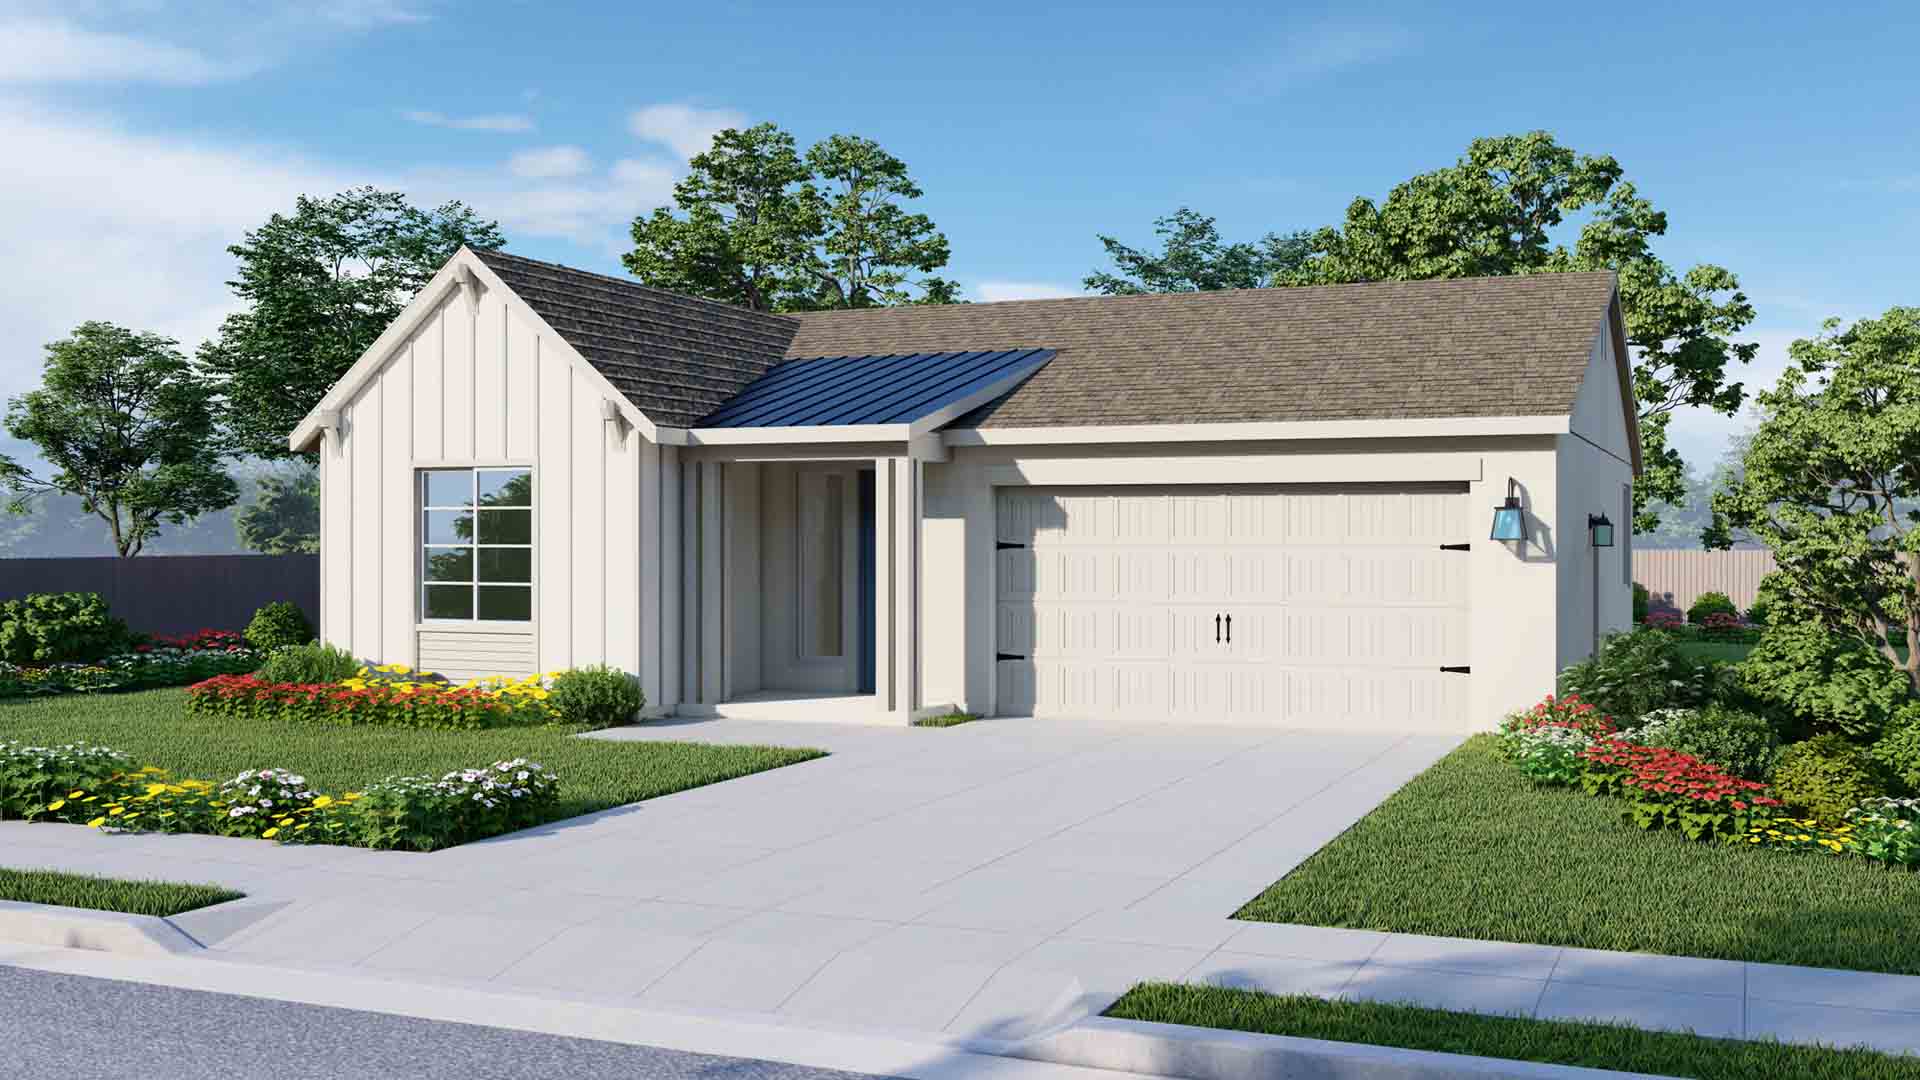 All Raleigh elevations are one-story homes. The Modern Farmhouse elevation features trim and details that give it a welcoming farmhouse look. The model pictured has cream vertical siding with cream trim. The garage door is also cream and has paneling and metal accents that give it an elevated look.